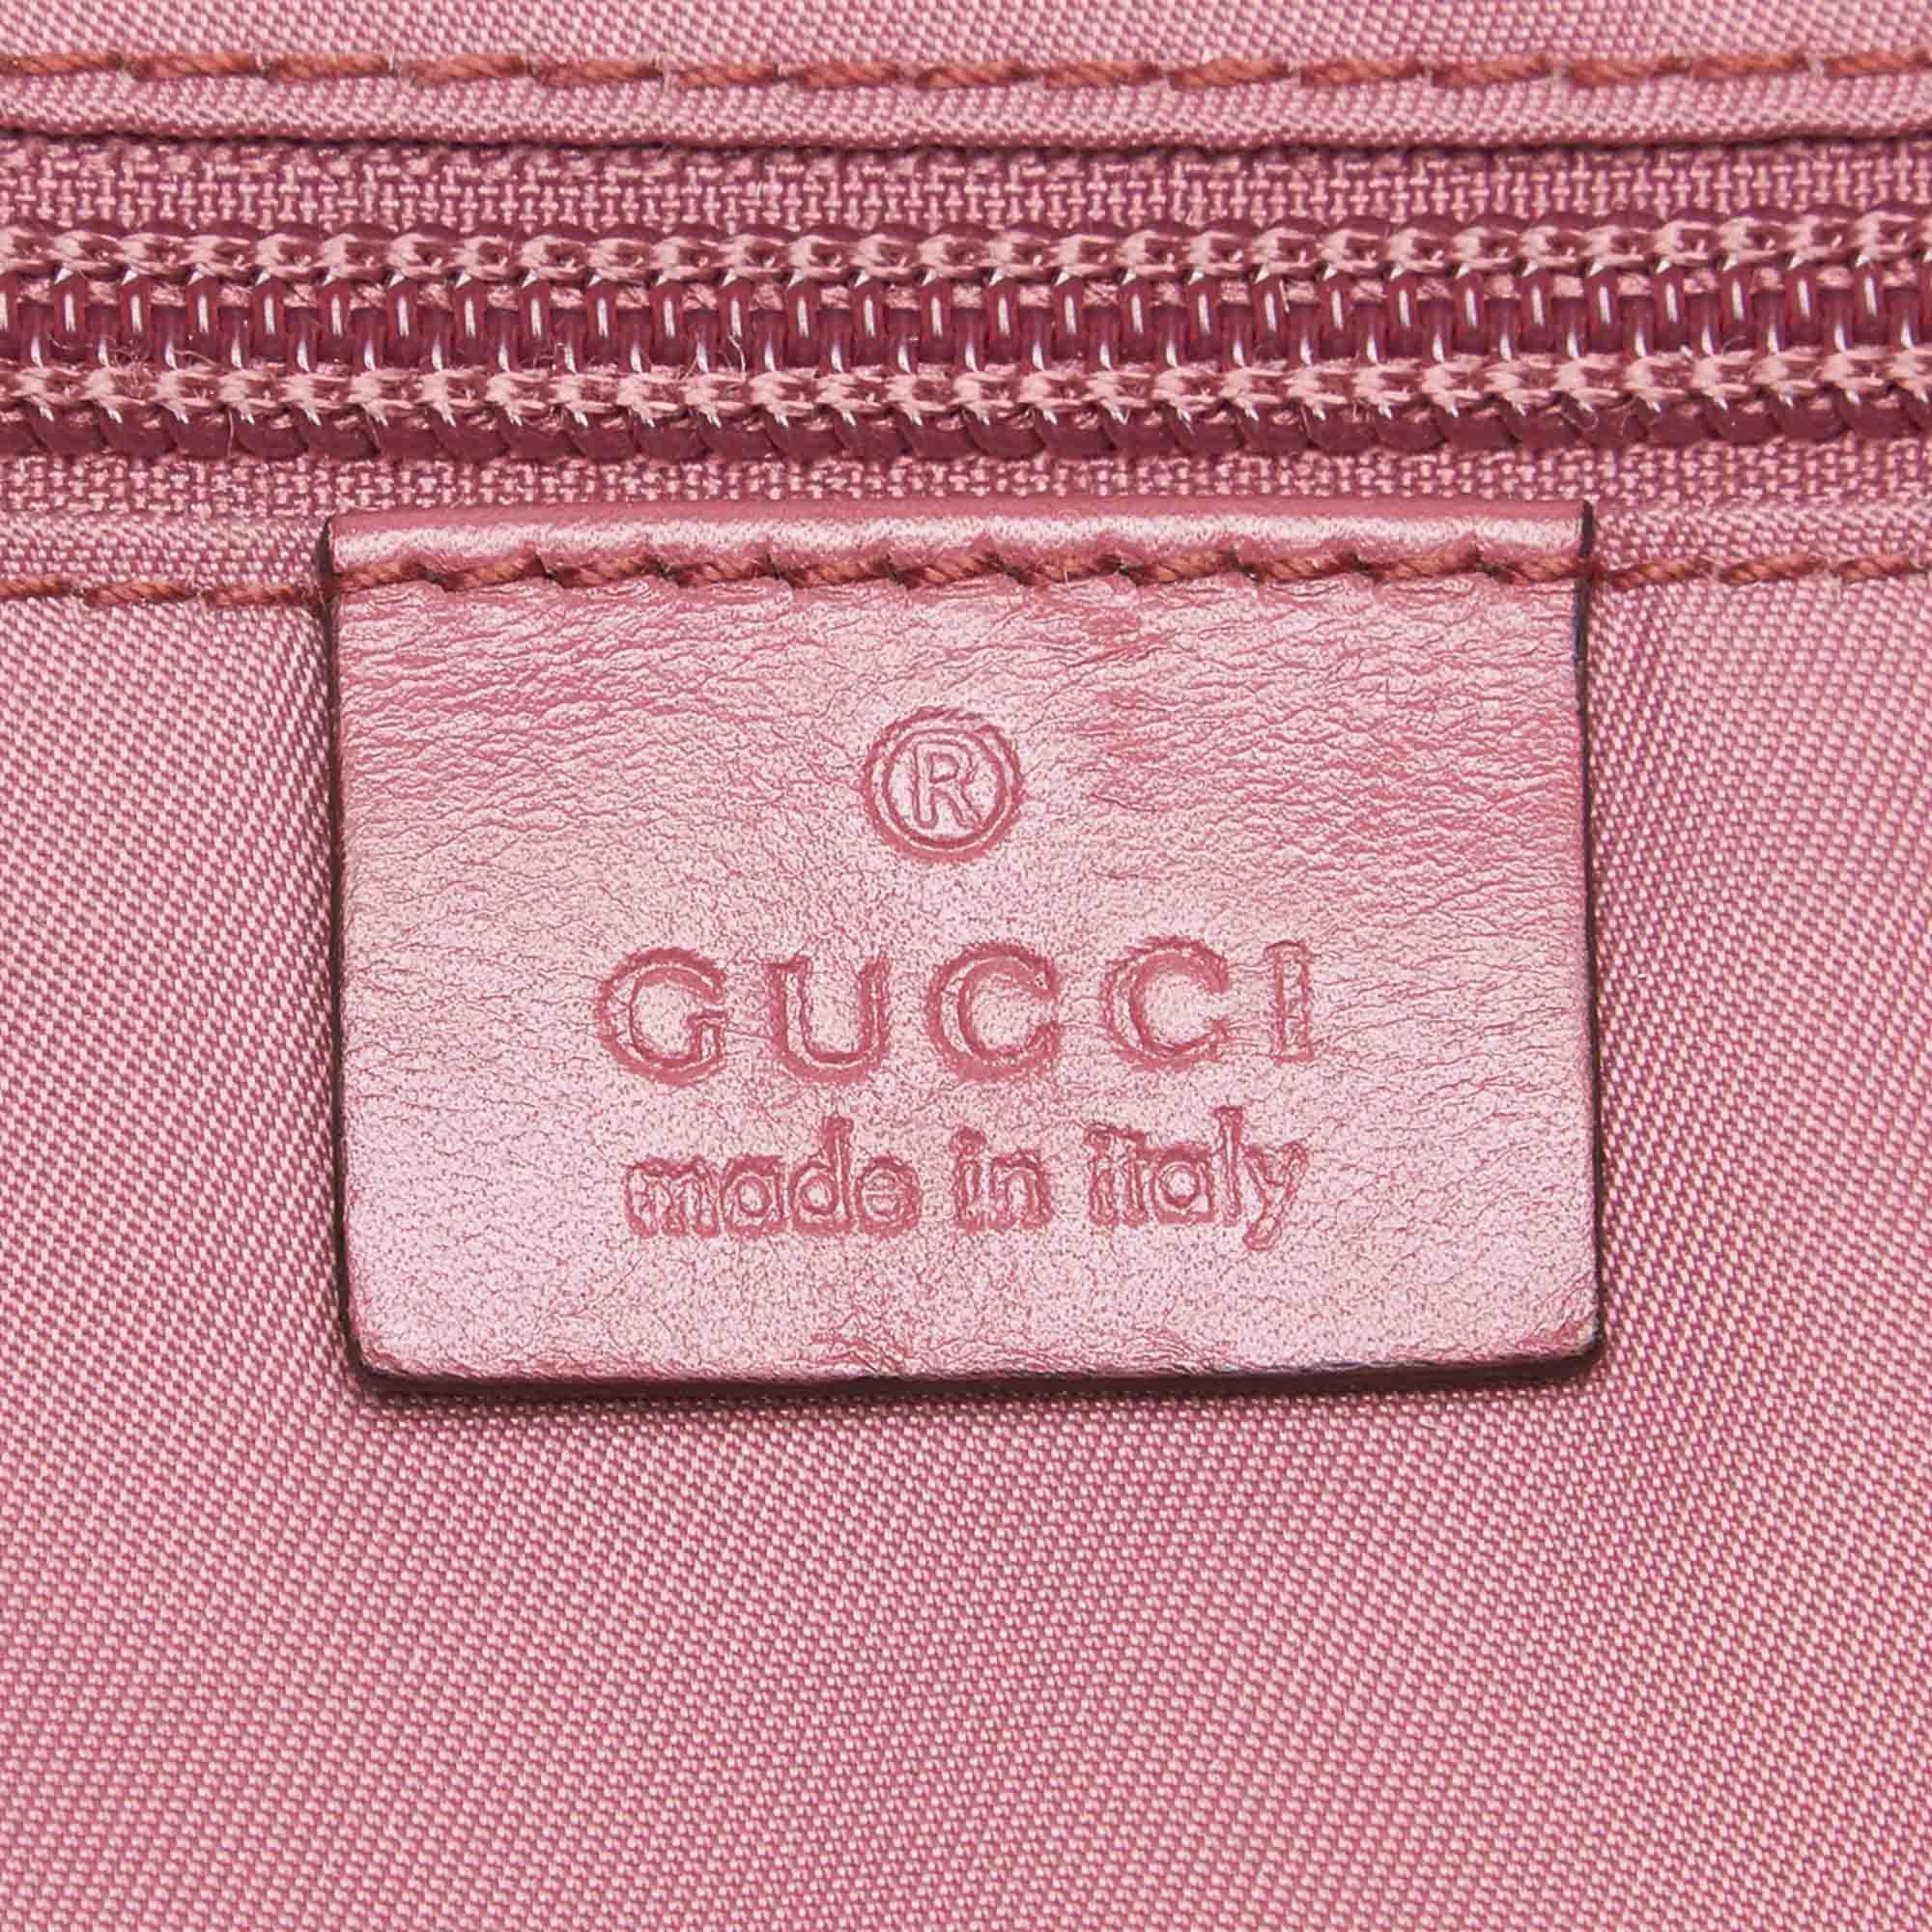 Vintage Authentic Gucci Pink Imprime Business Bag Italy w Padlock Key LARGE  For Sale 2